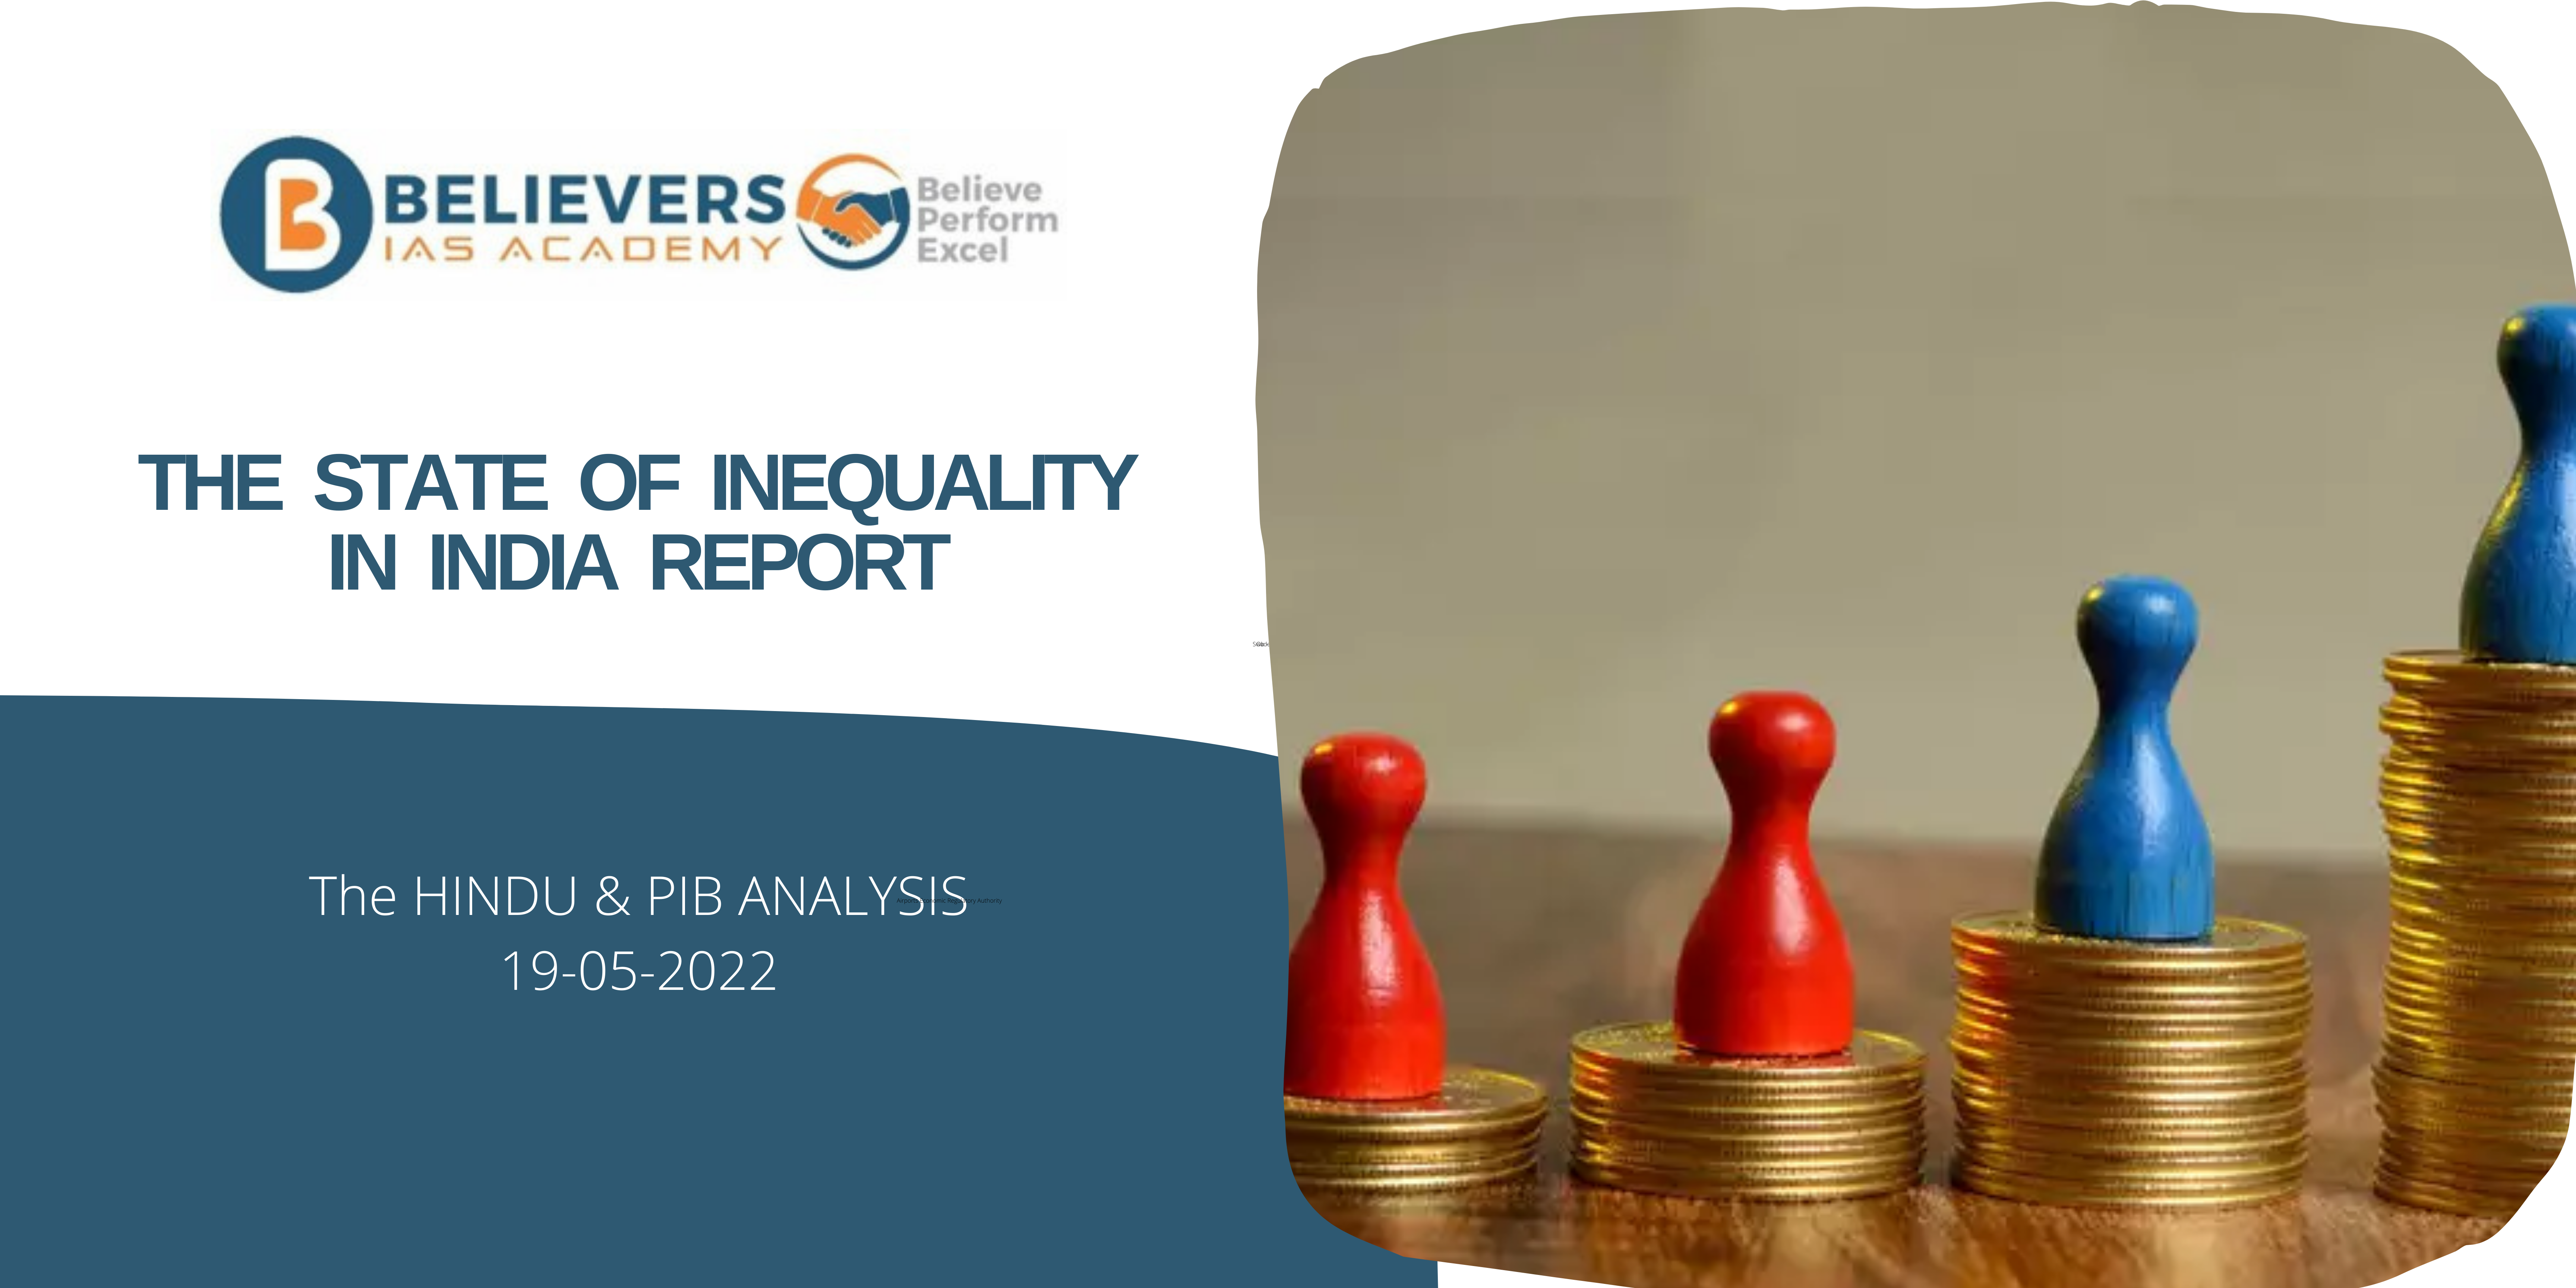 UPSC Current affairs - The State of Inequality in India Report